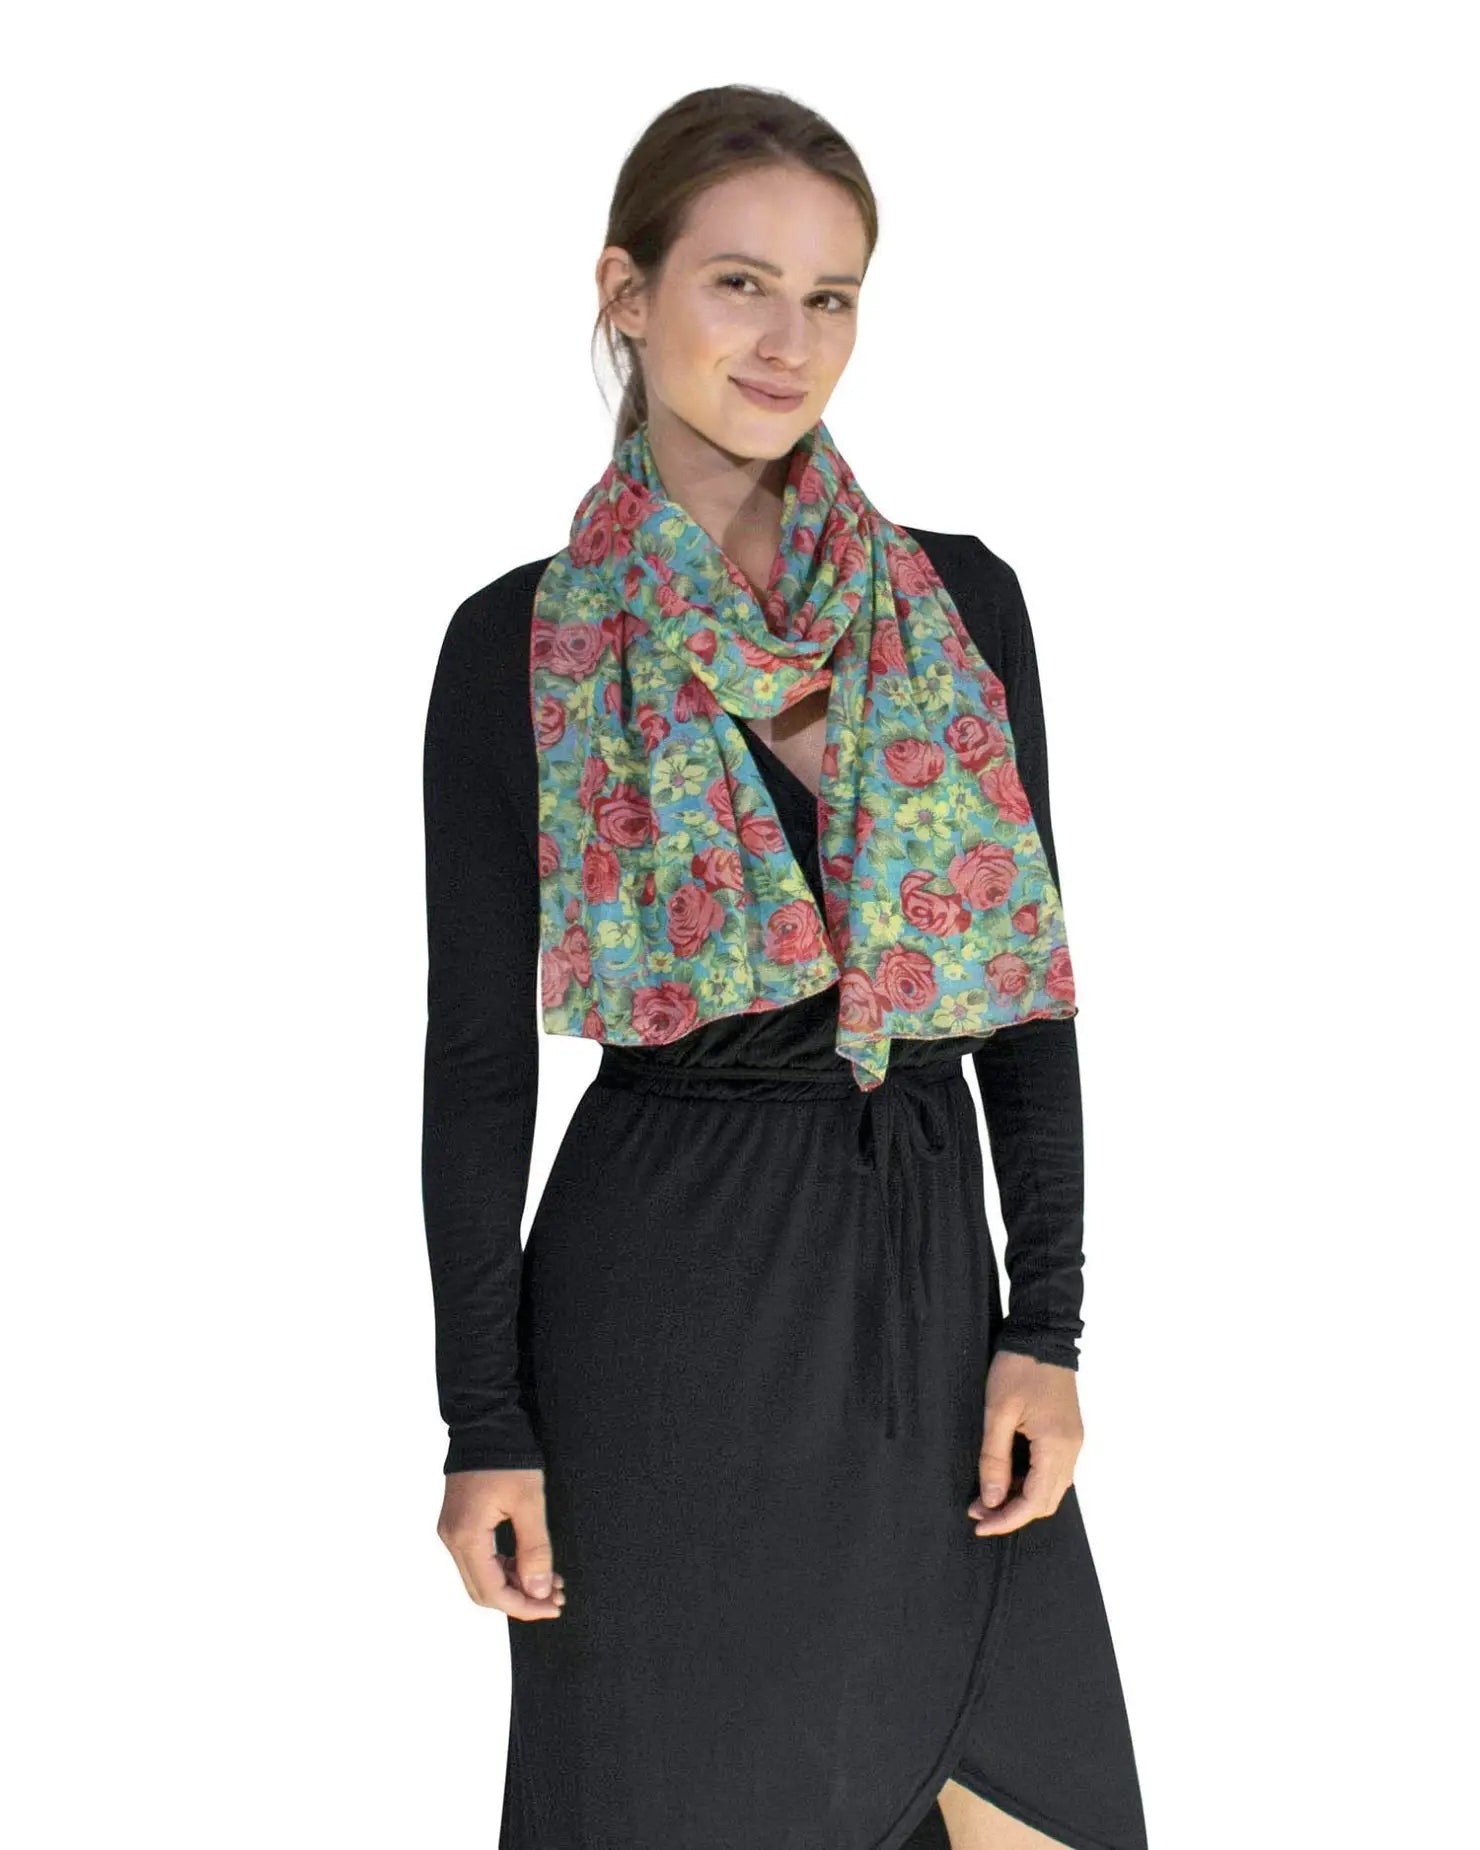 Woman wearing black dress and ditsy floral print lightweight scarf